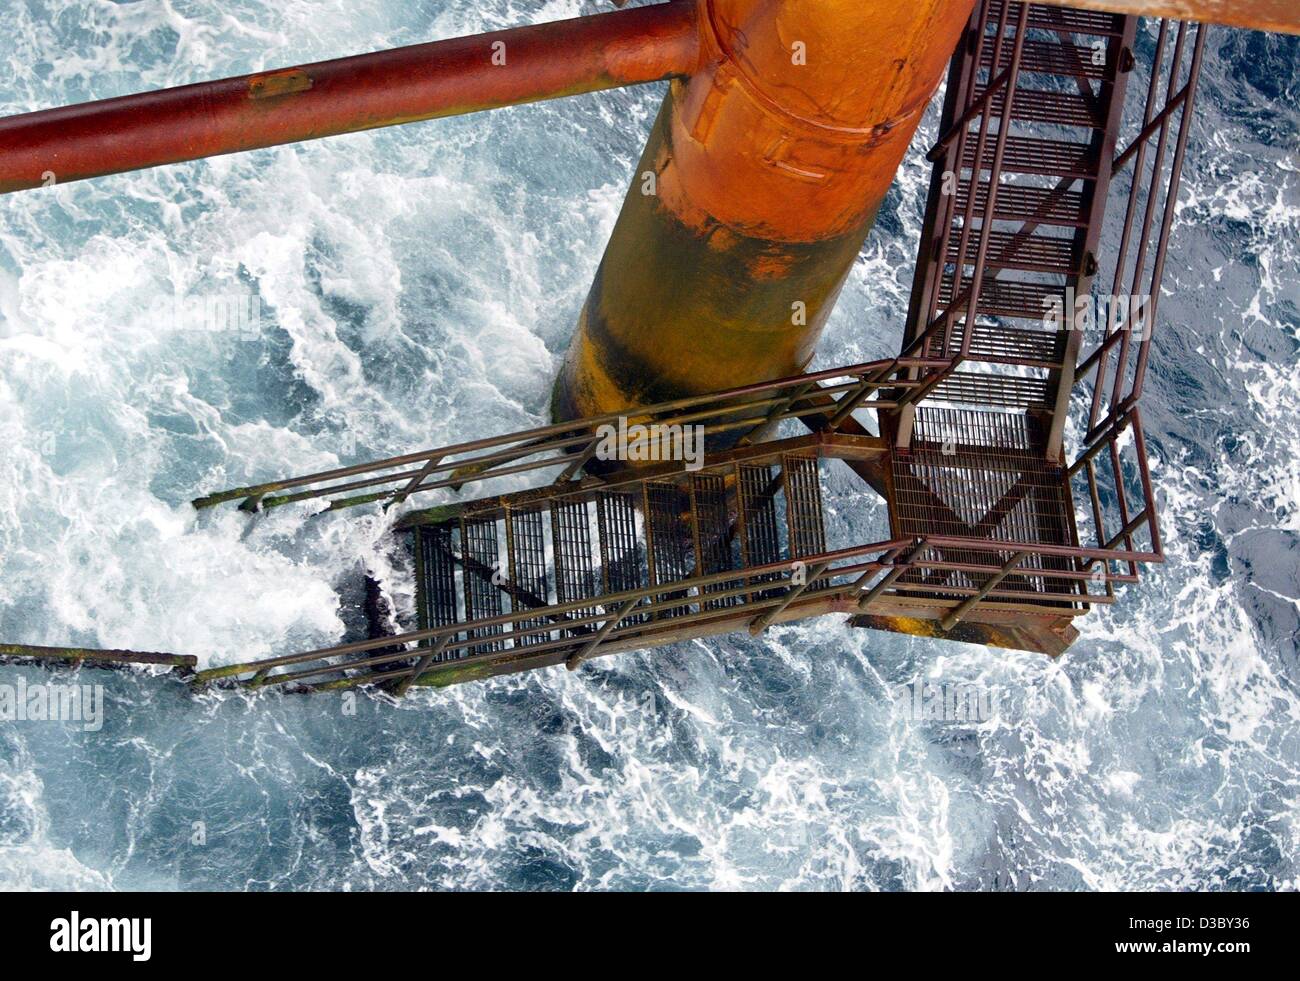 (dpa) - A security staircase leads down to the water level of the sea from a gas and oil rig in the North Sea, about 250 km offshore of Stavanger, Norway, 5 July 2003. The platform belongs to the Ekofisk field complex, which comprises the oil and gas rigs Ekofisk, Eldfisk, Embla and Tor. The workers Stock Photo